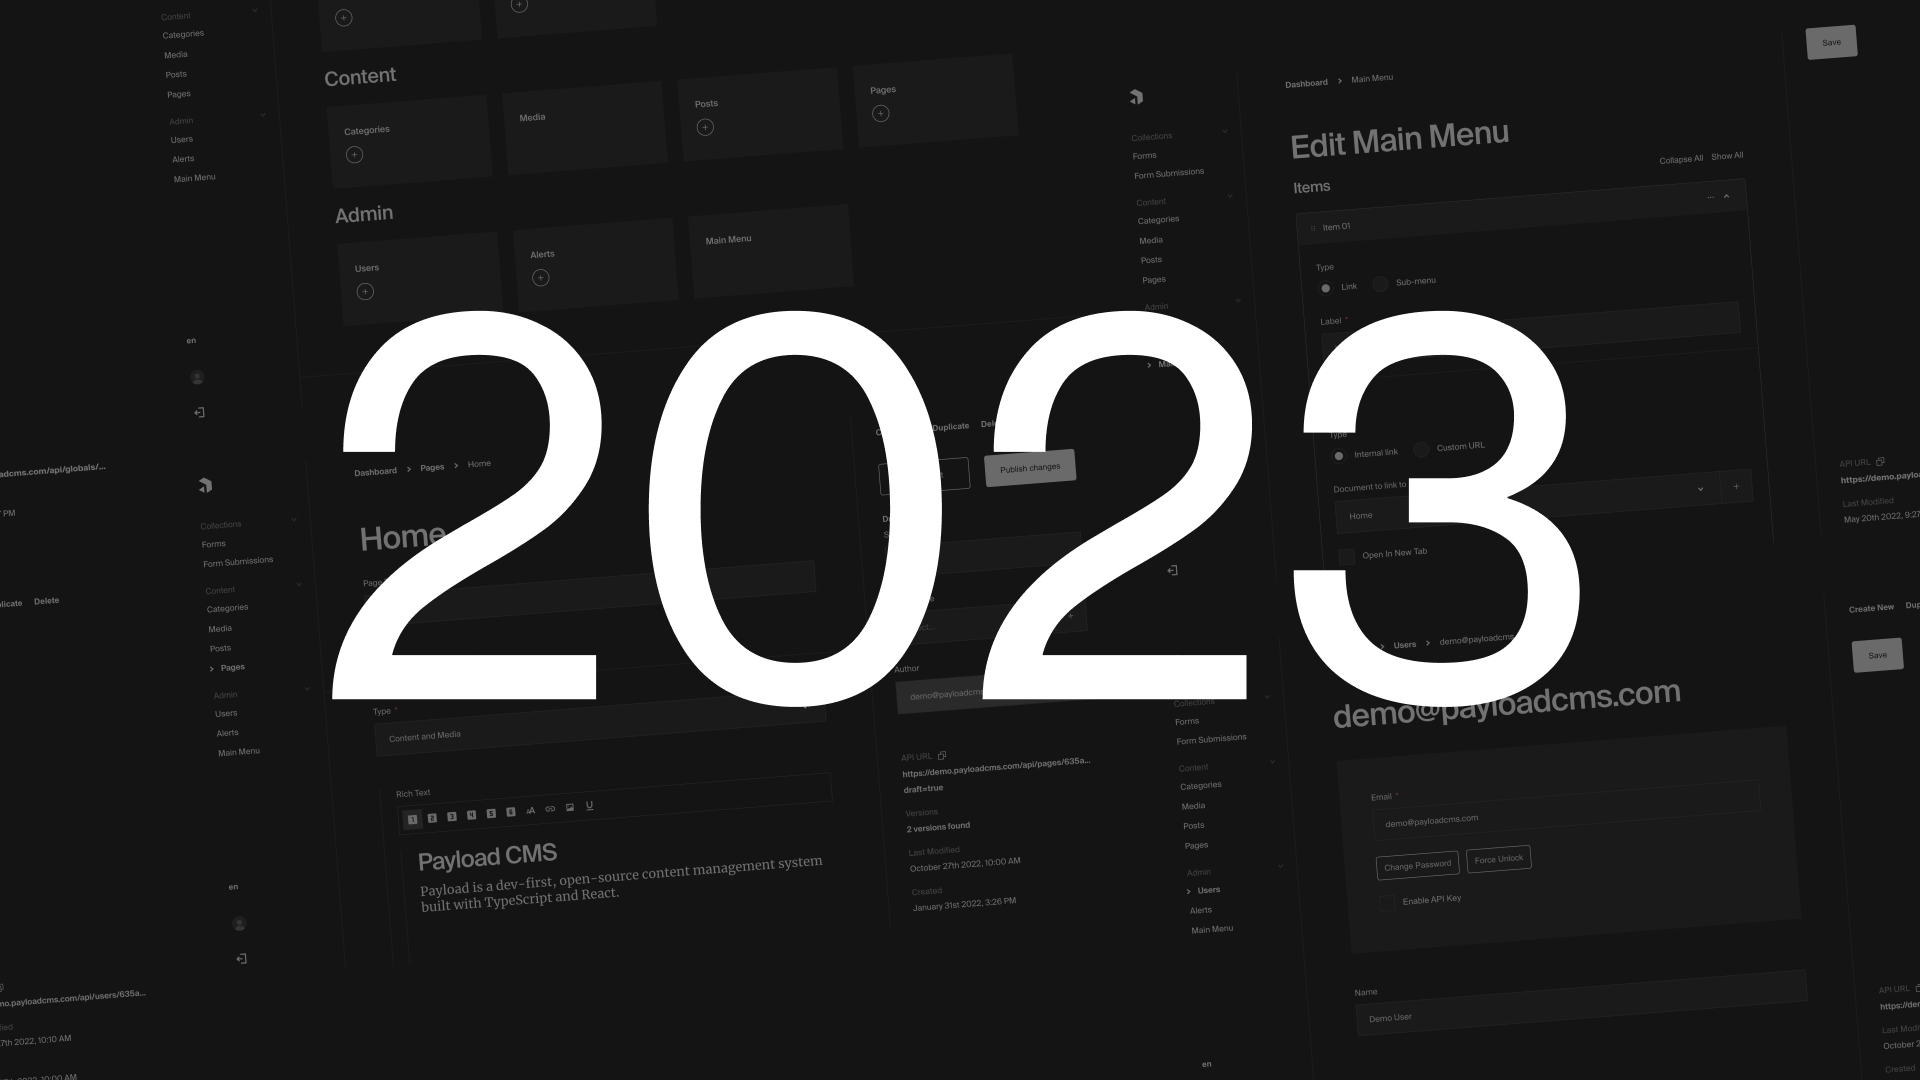 What's next for Payload in 2023